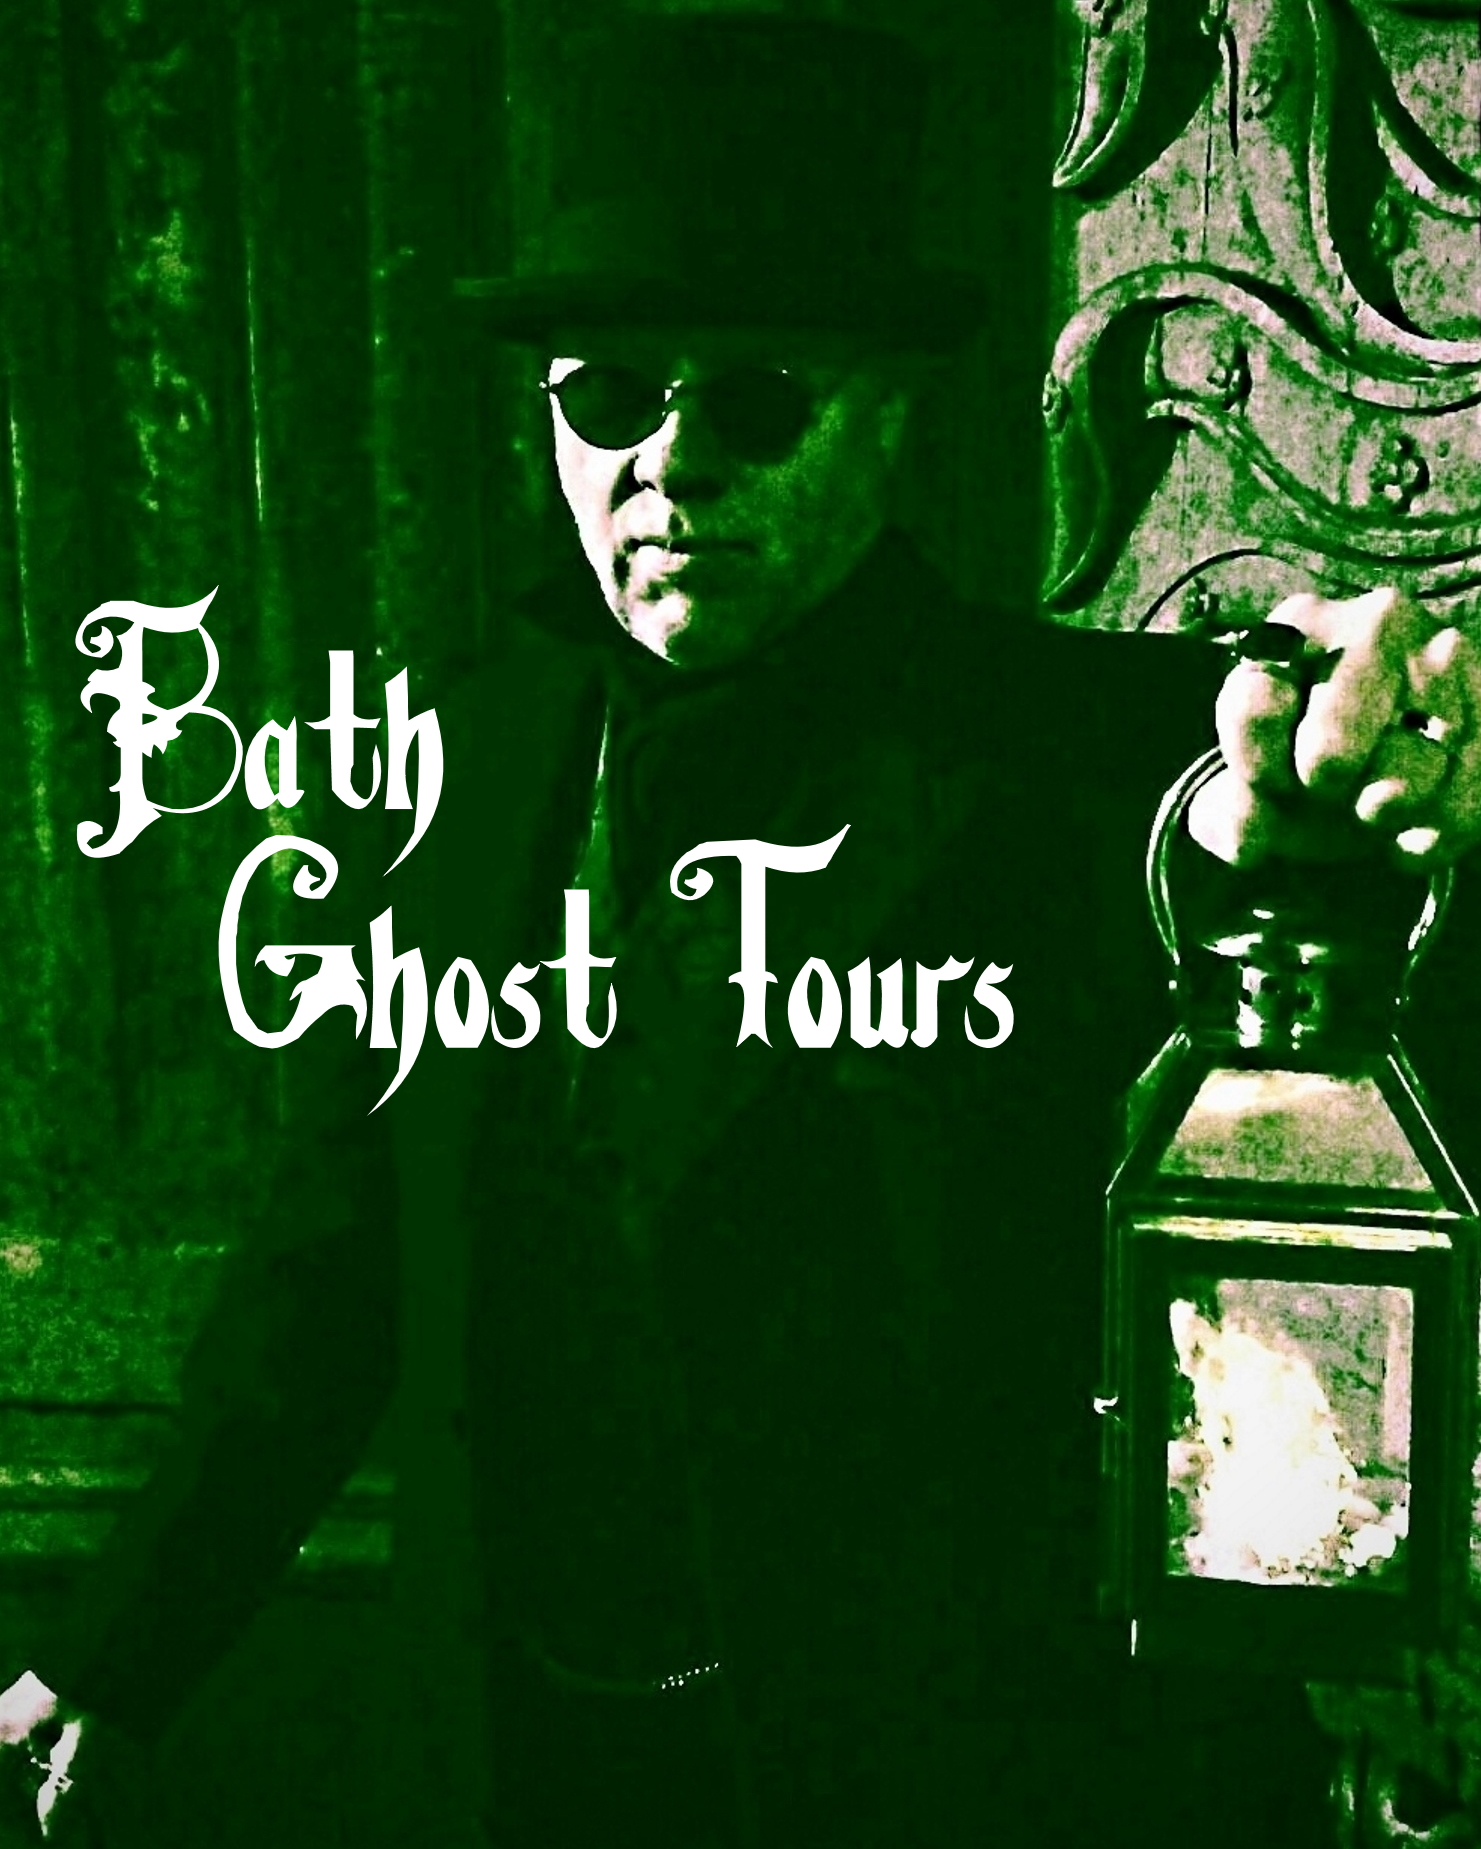 Image of Walking Tours of Bath - Home of Bath Ghost Tours and Bristol Ghost Tours.